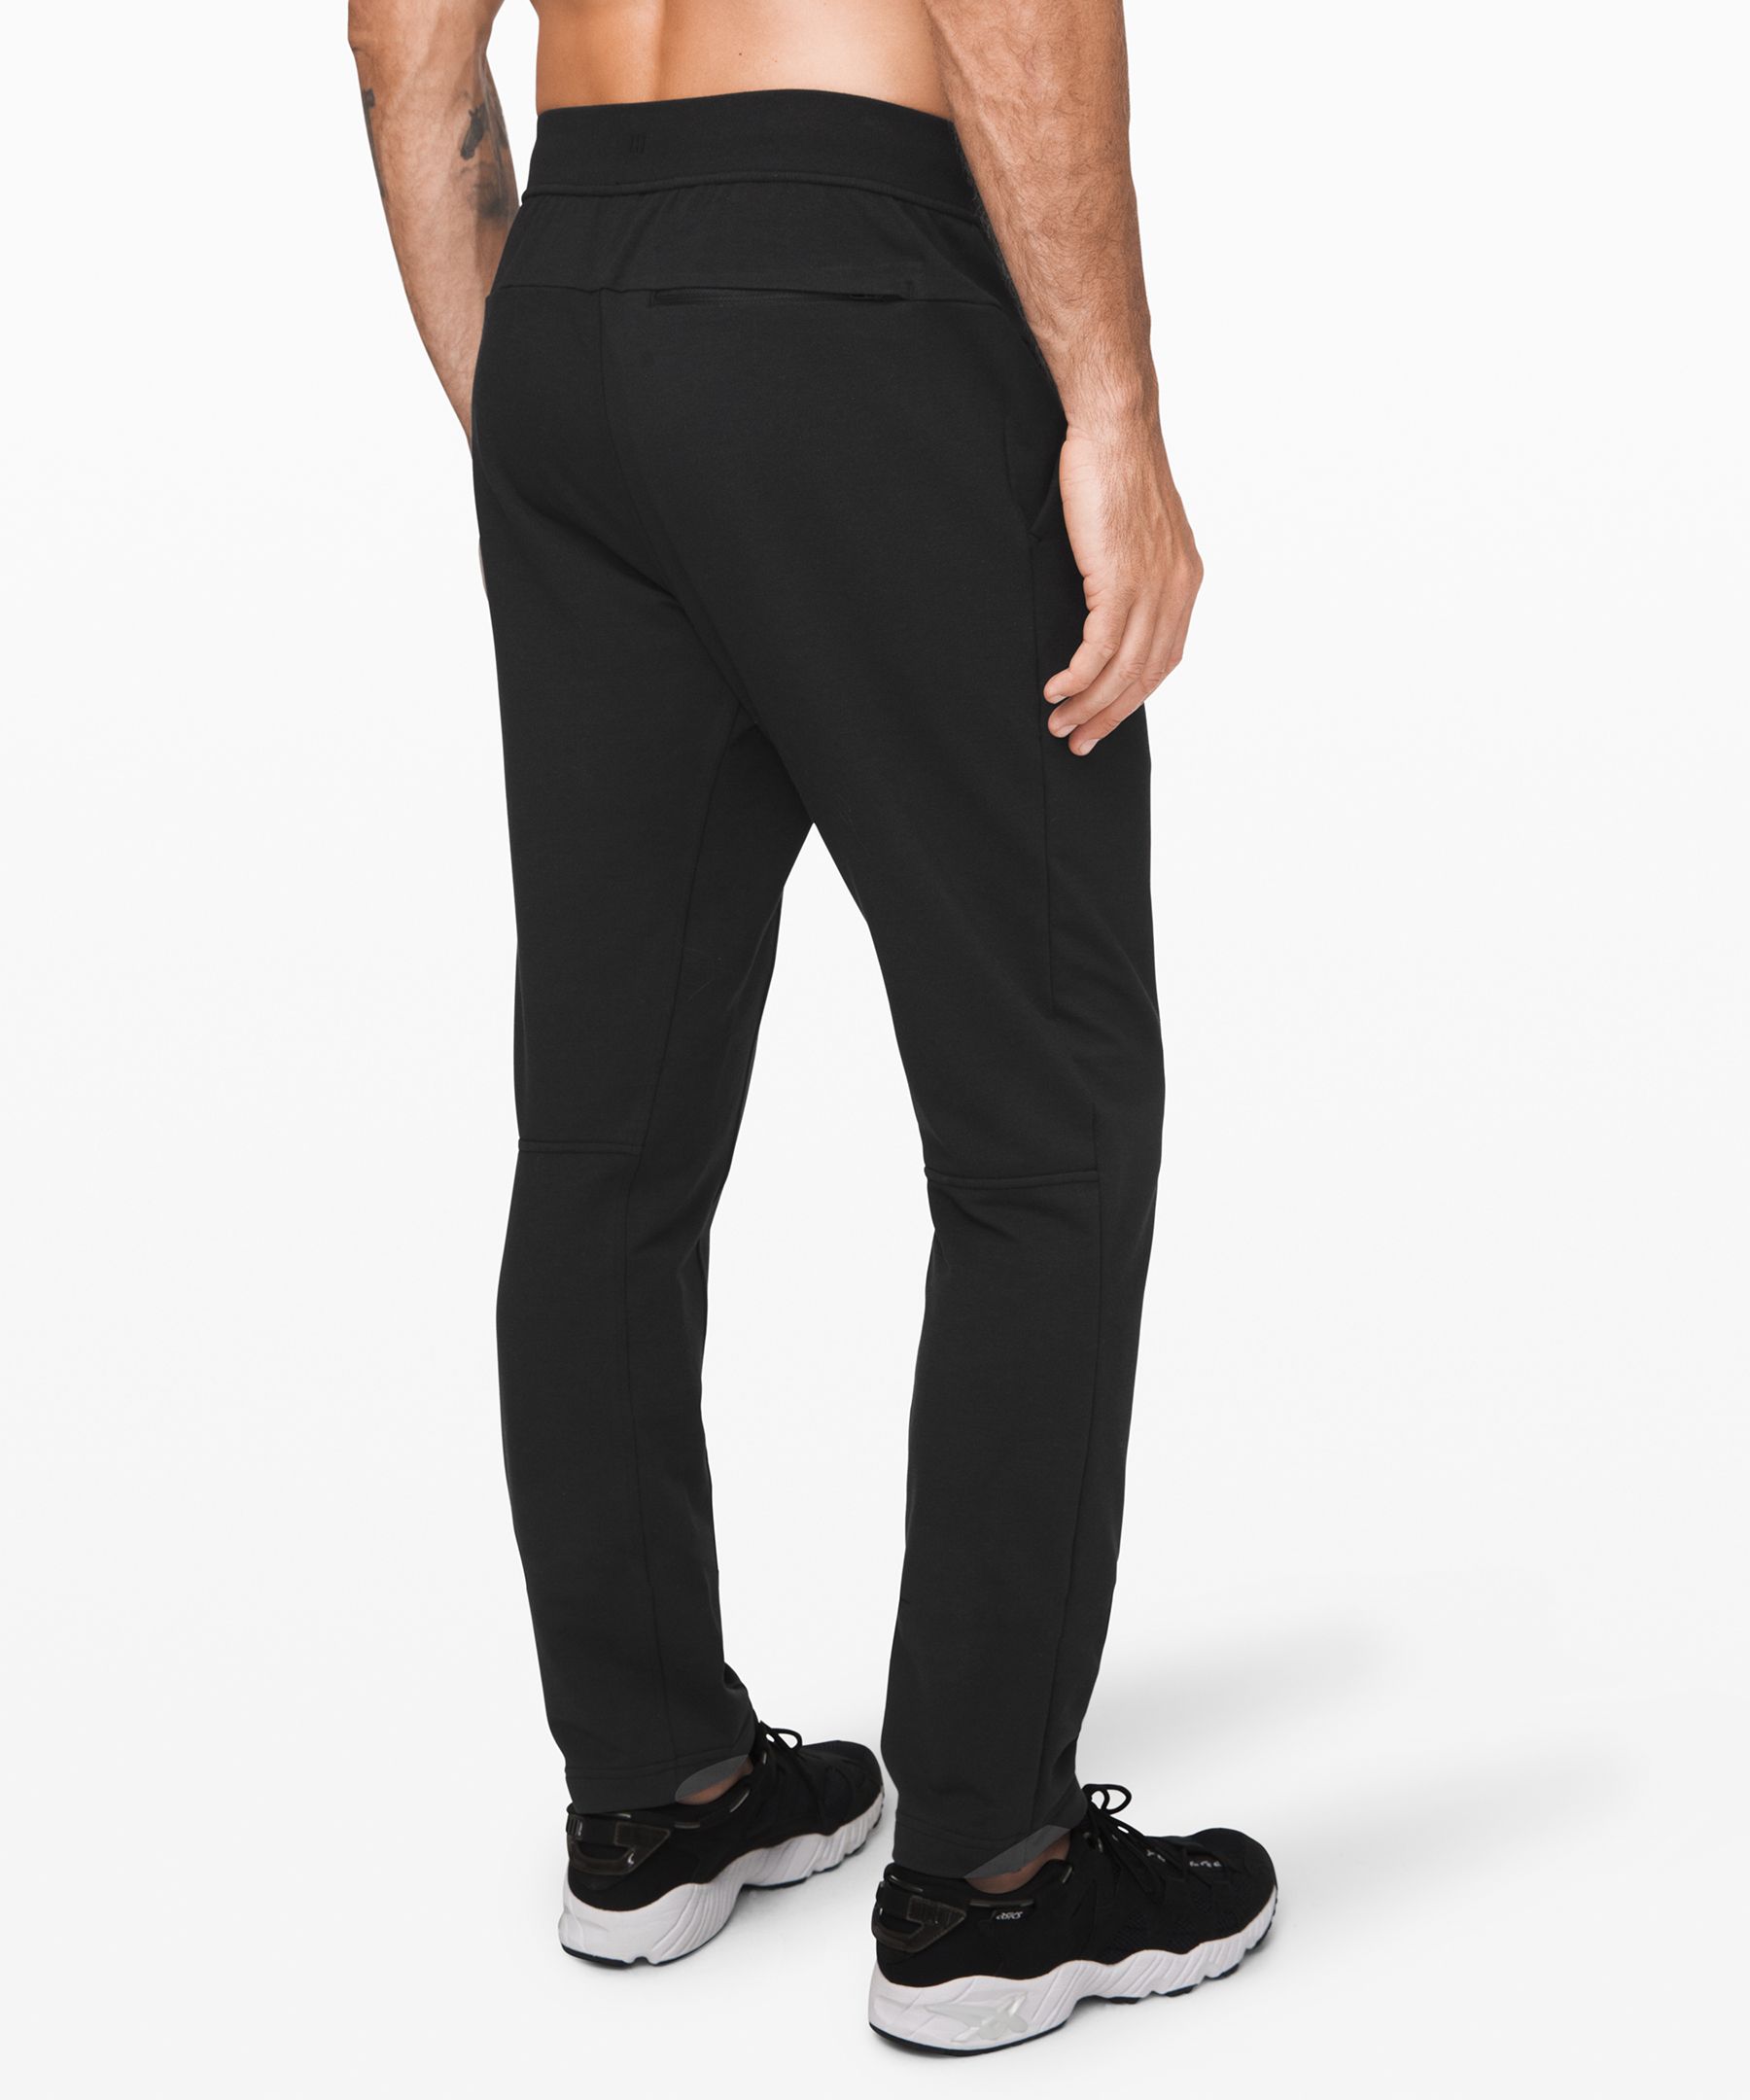 Louis Vuitton Sweatpants Luxembourg, SAVE 57% 